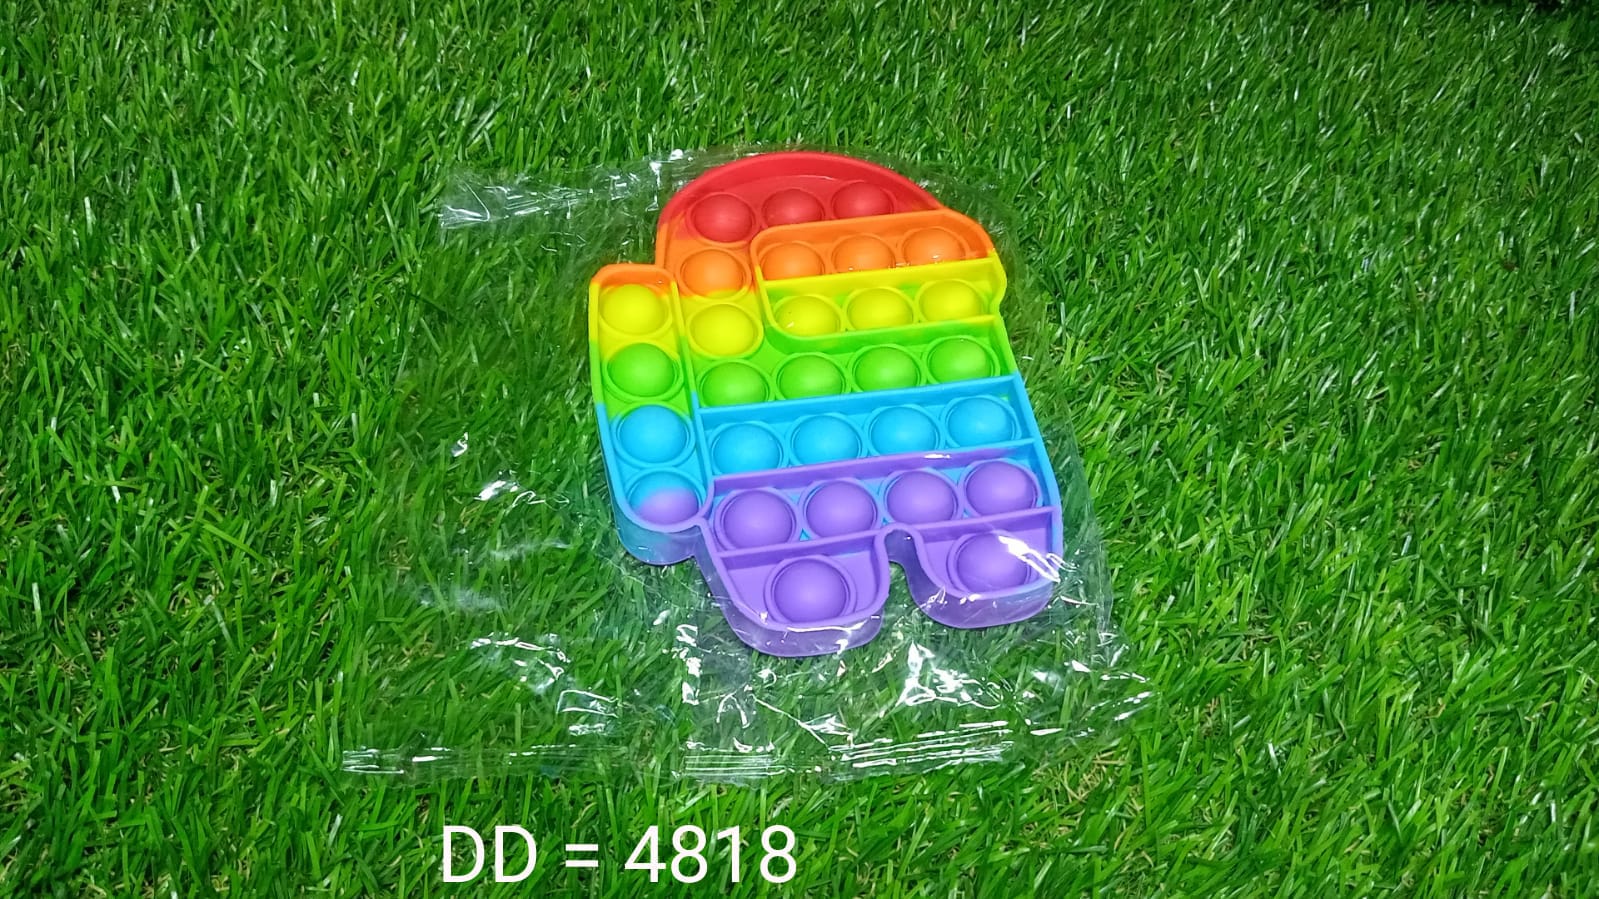 4818 Among US Fidget Toy used by kids, children's and even adults for playing and entertaining purposes etc. DeoDap